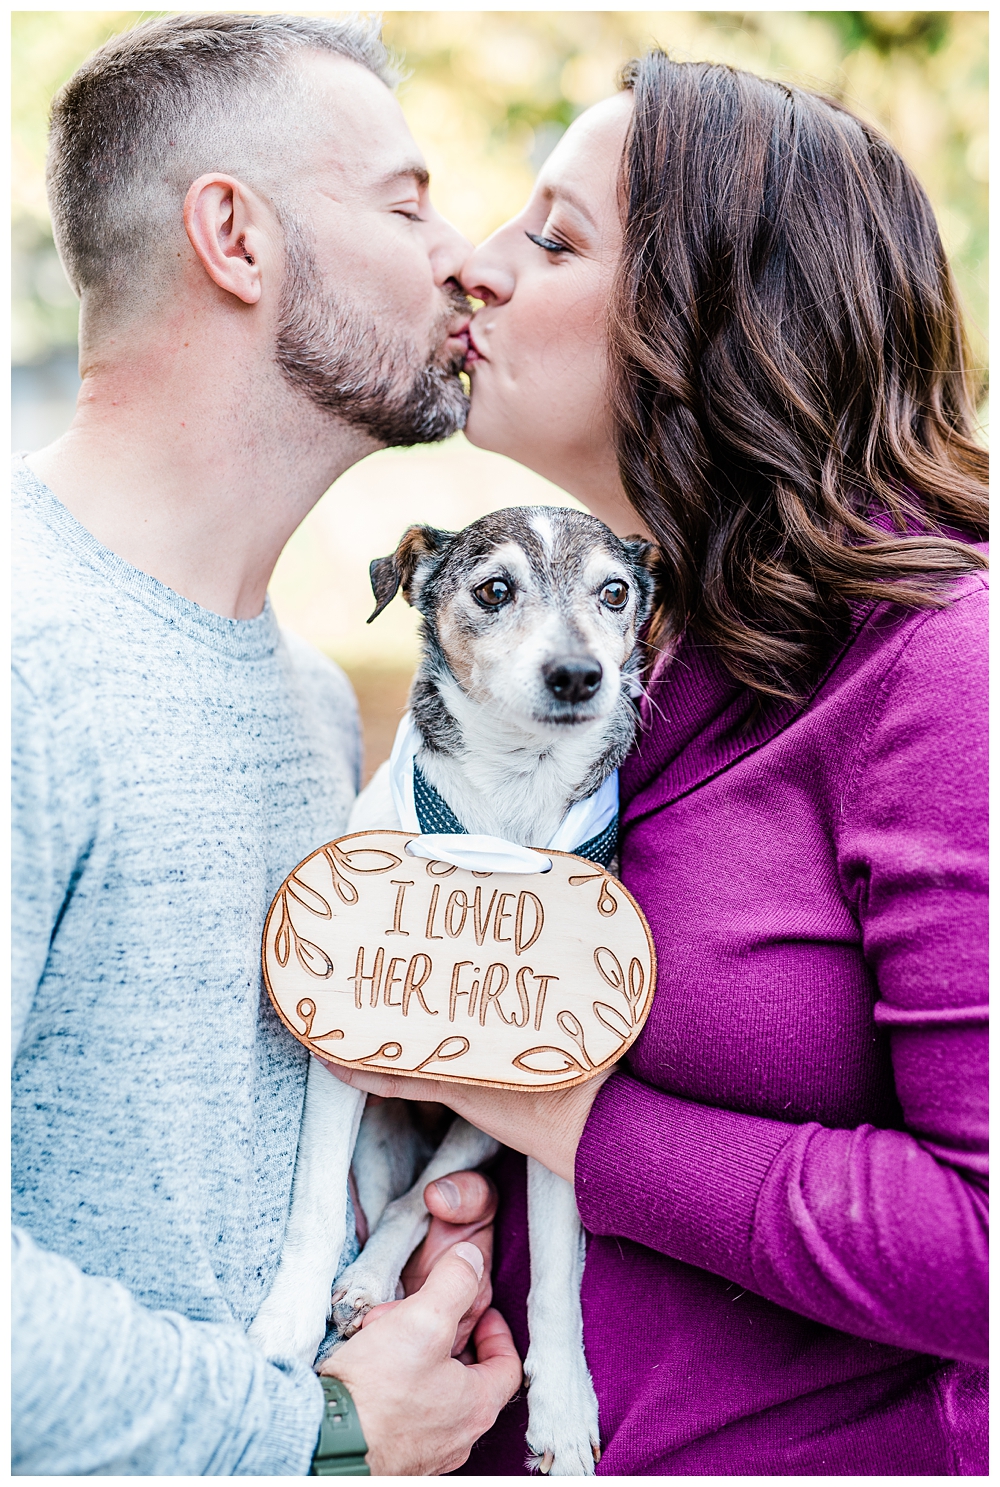 Dog engagement photos; i loved her first; i loved her first sign;